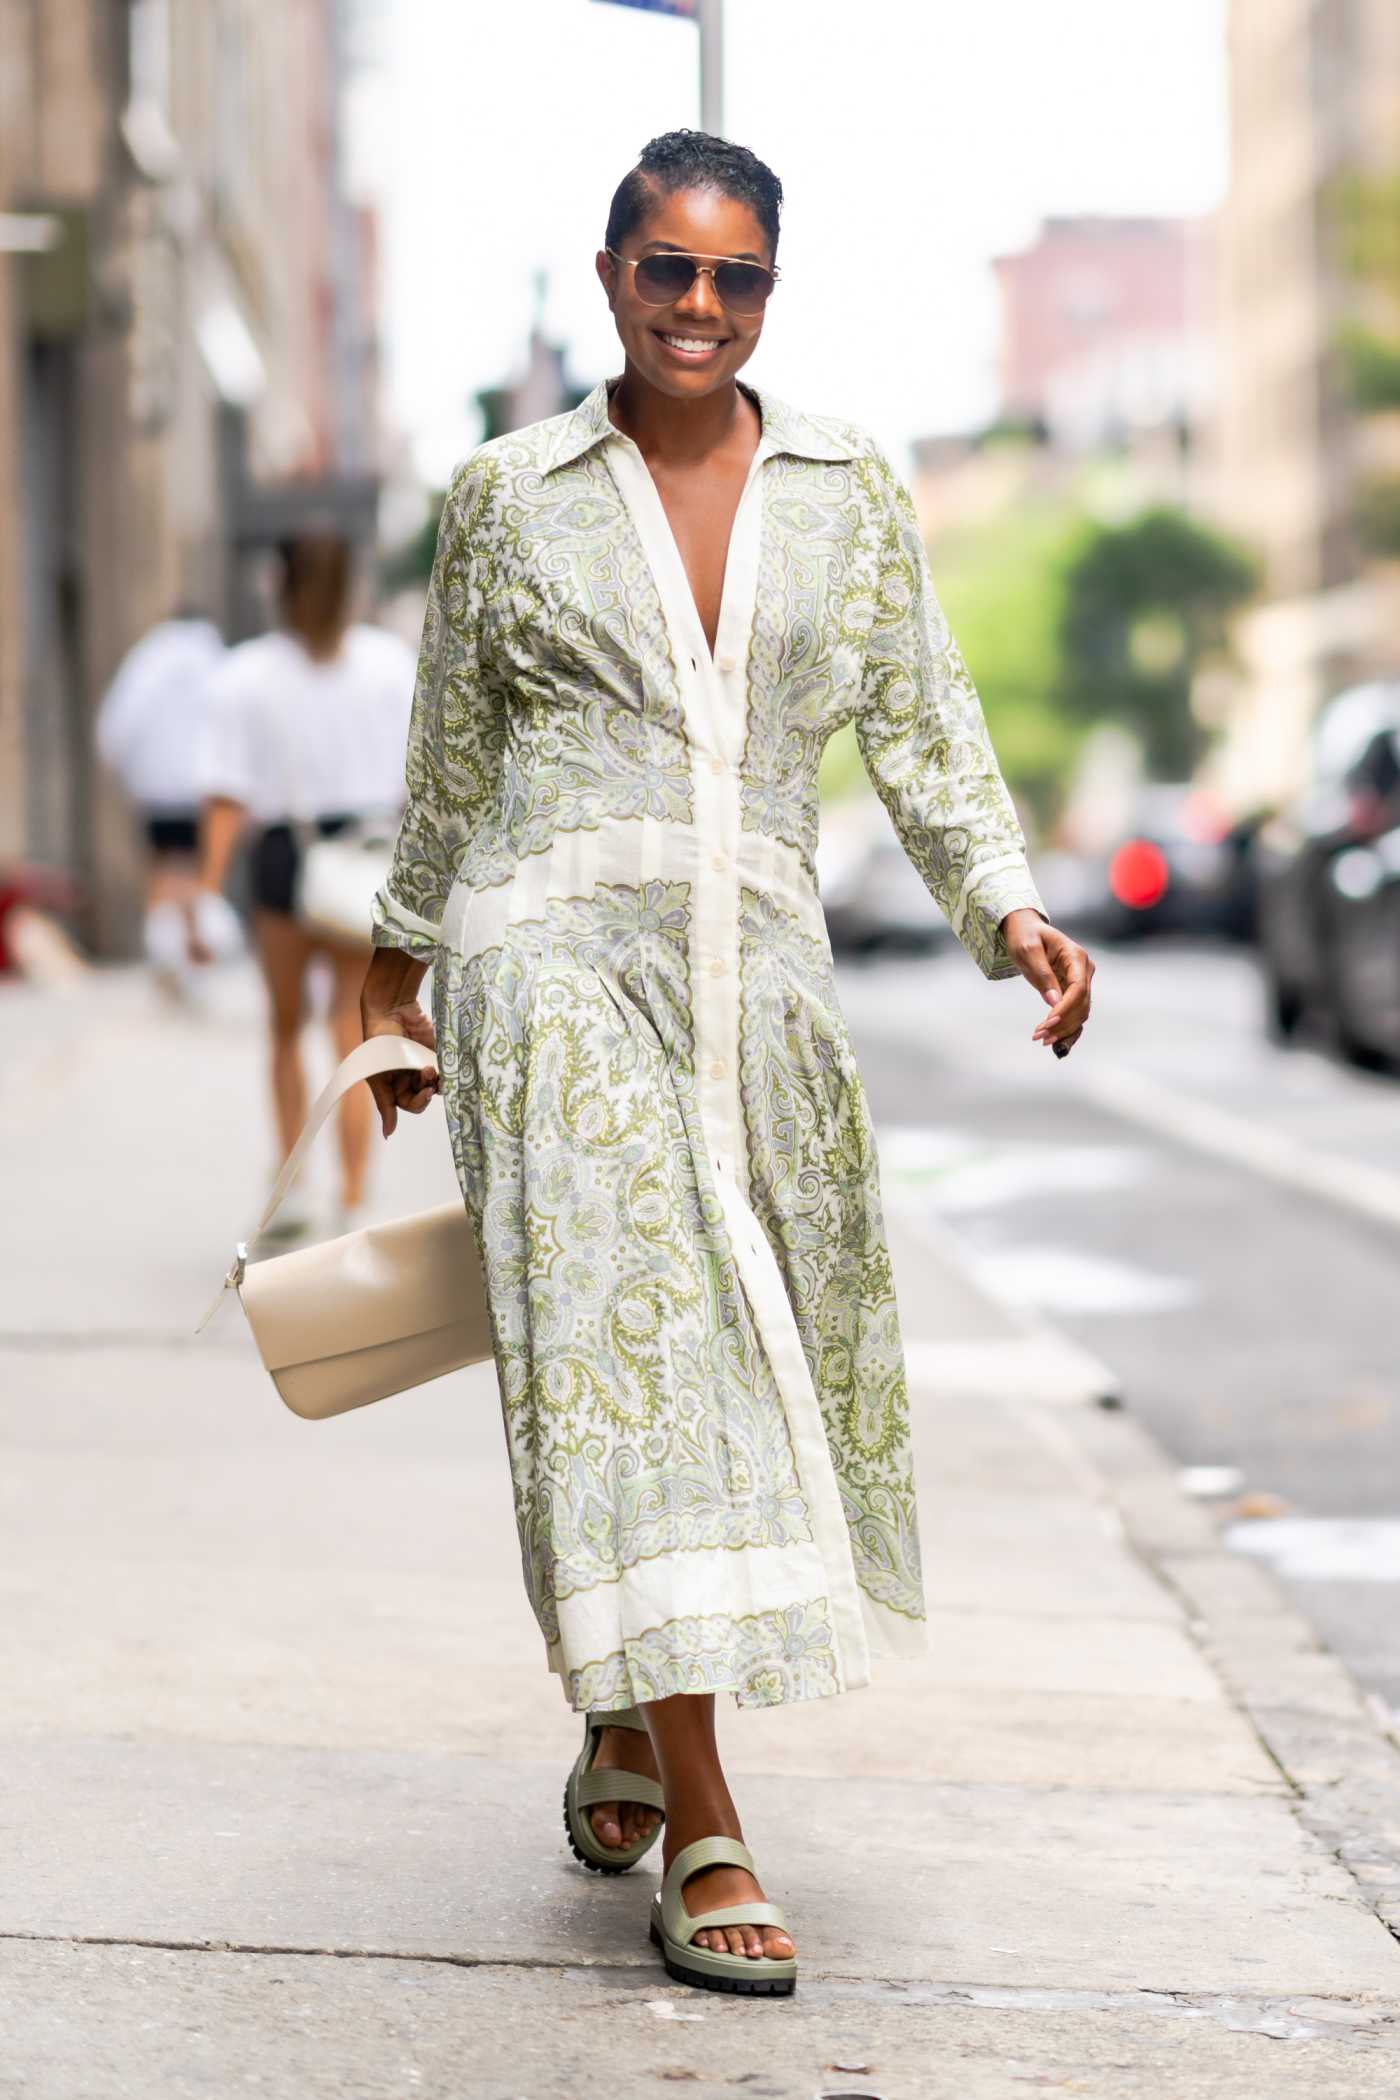 Gabrielle Union in a Patterned Dress Was Seen Out in New York 07/27/2021